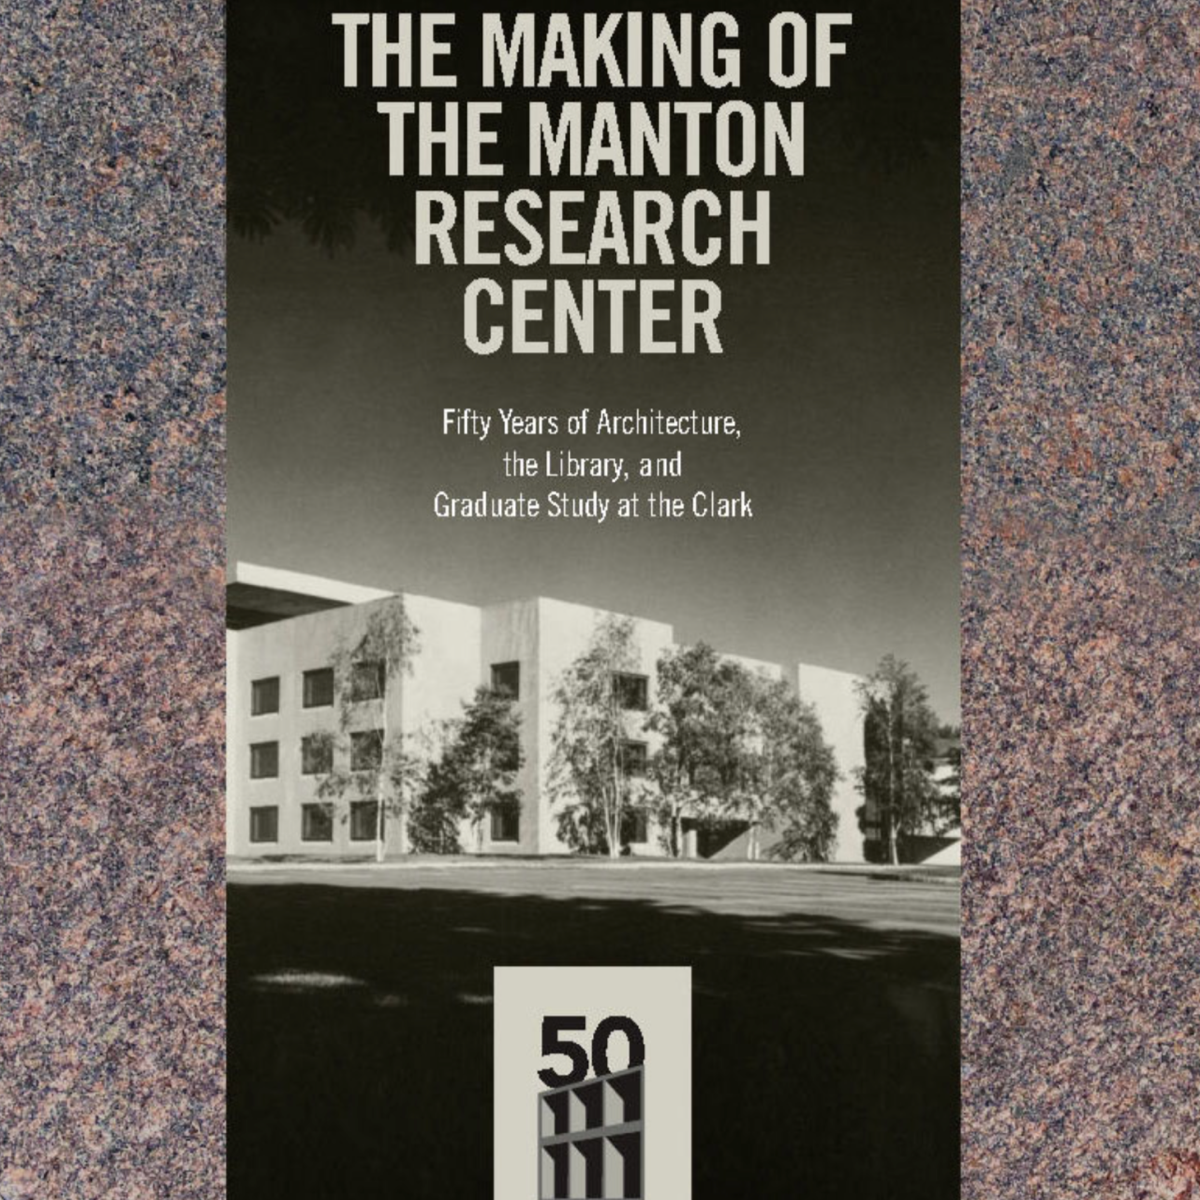 THE MAKING OF THE MANTON RESEARCH CENTER: FIFTY YEARS OF ARCHITECTURE, THE LIBRARY, AND GRADUATE STUDY AT THE CLARK